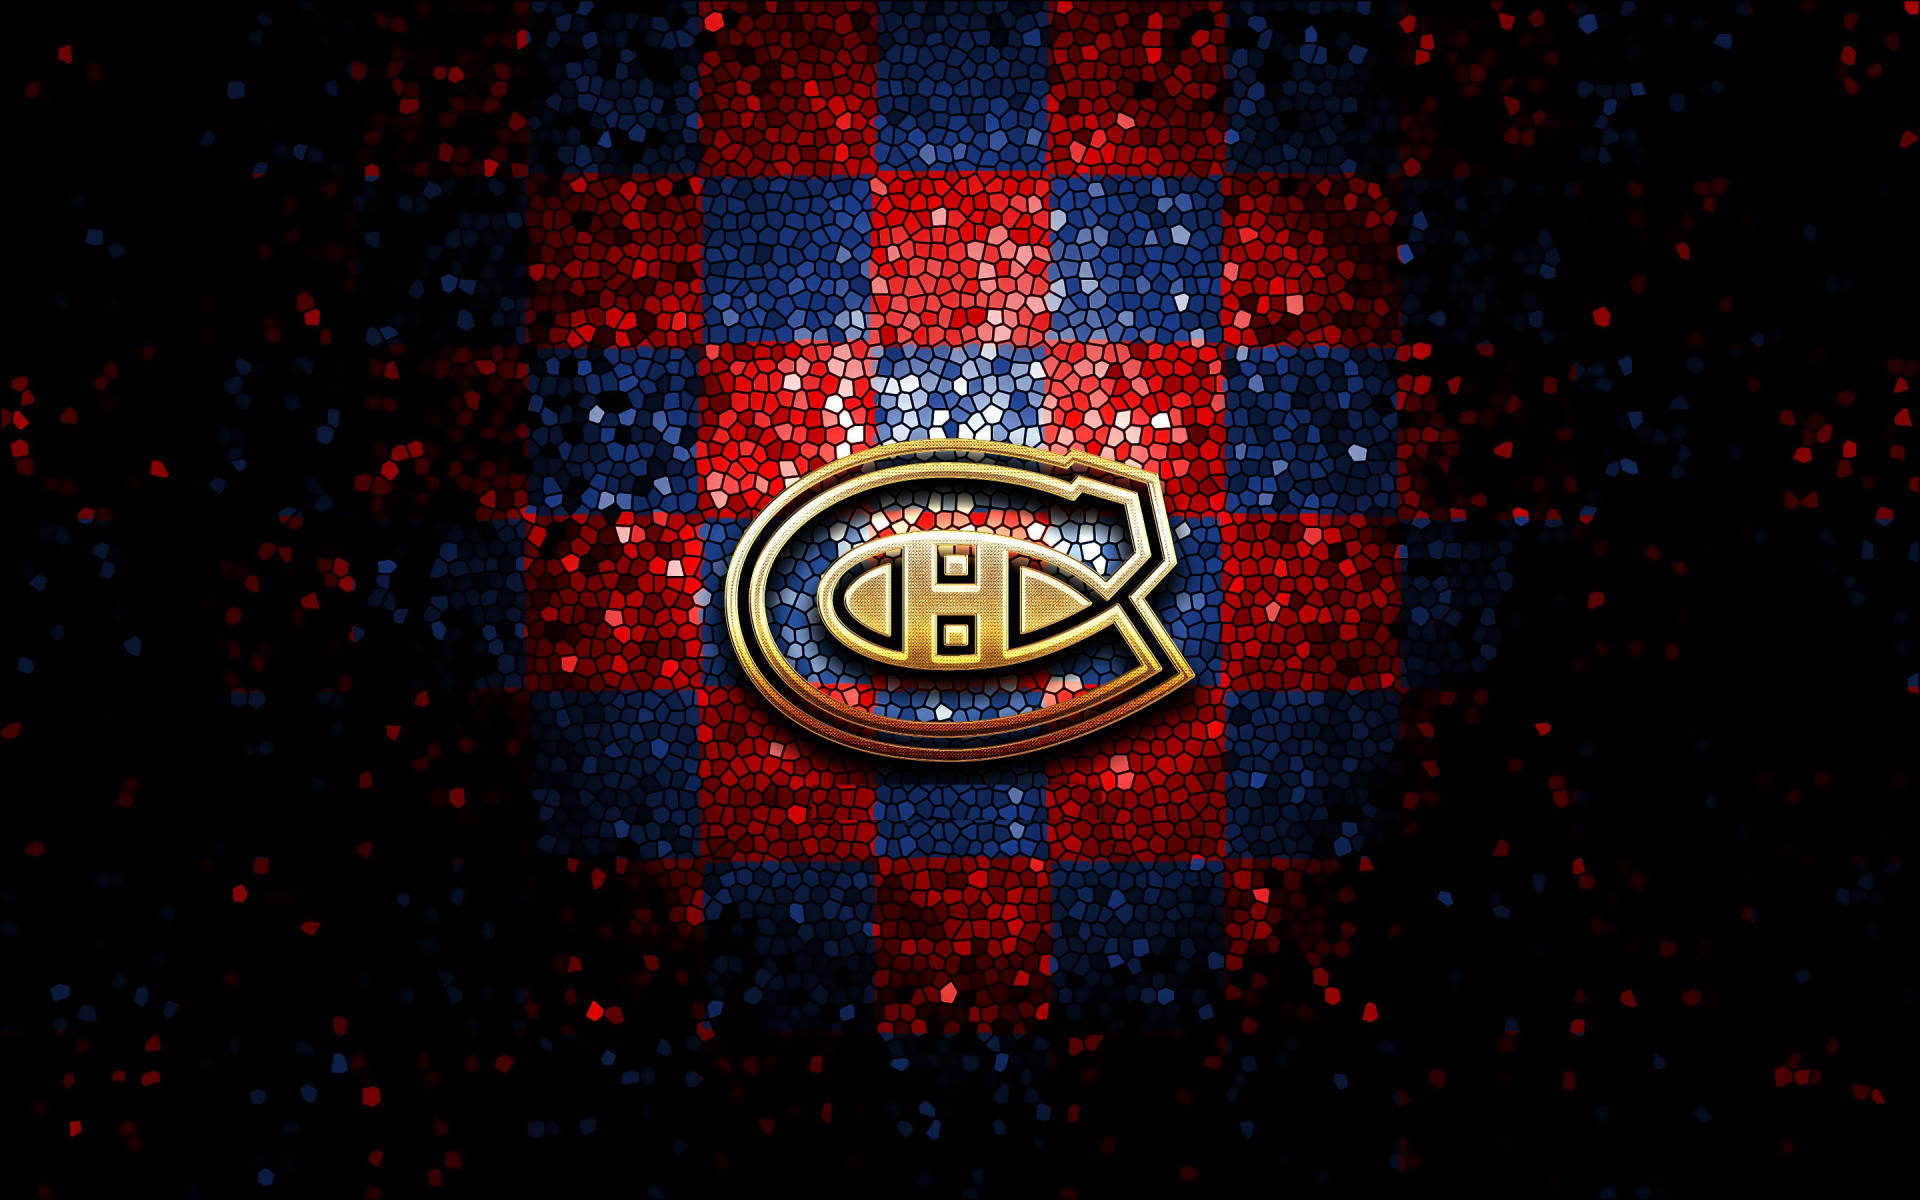 Montreal Canadiens Gold Emblem Background